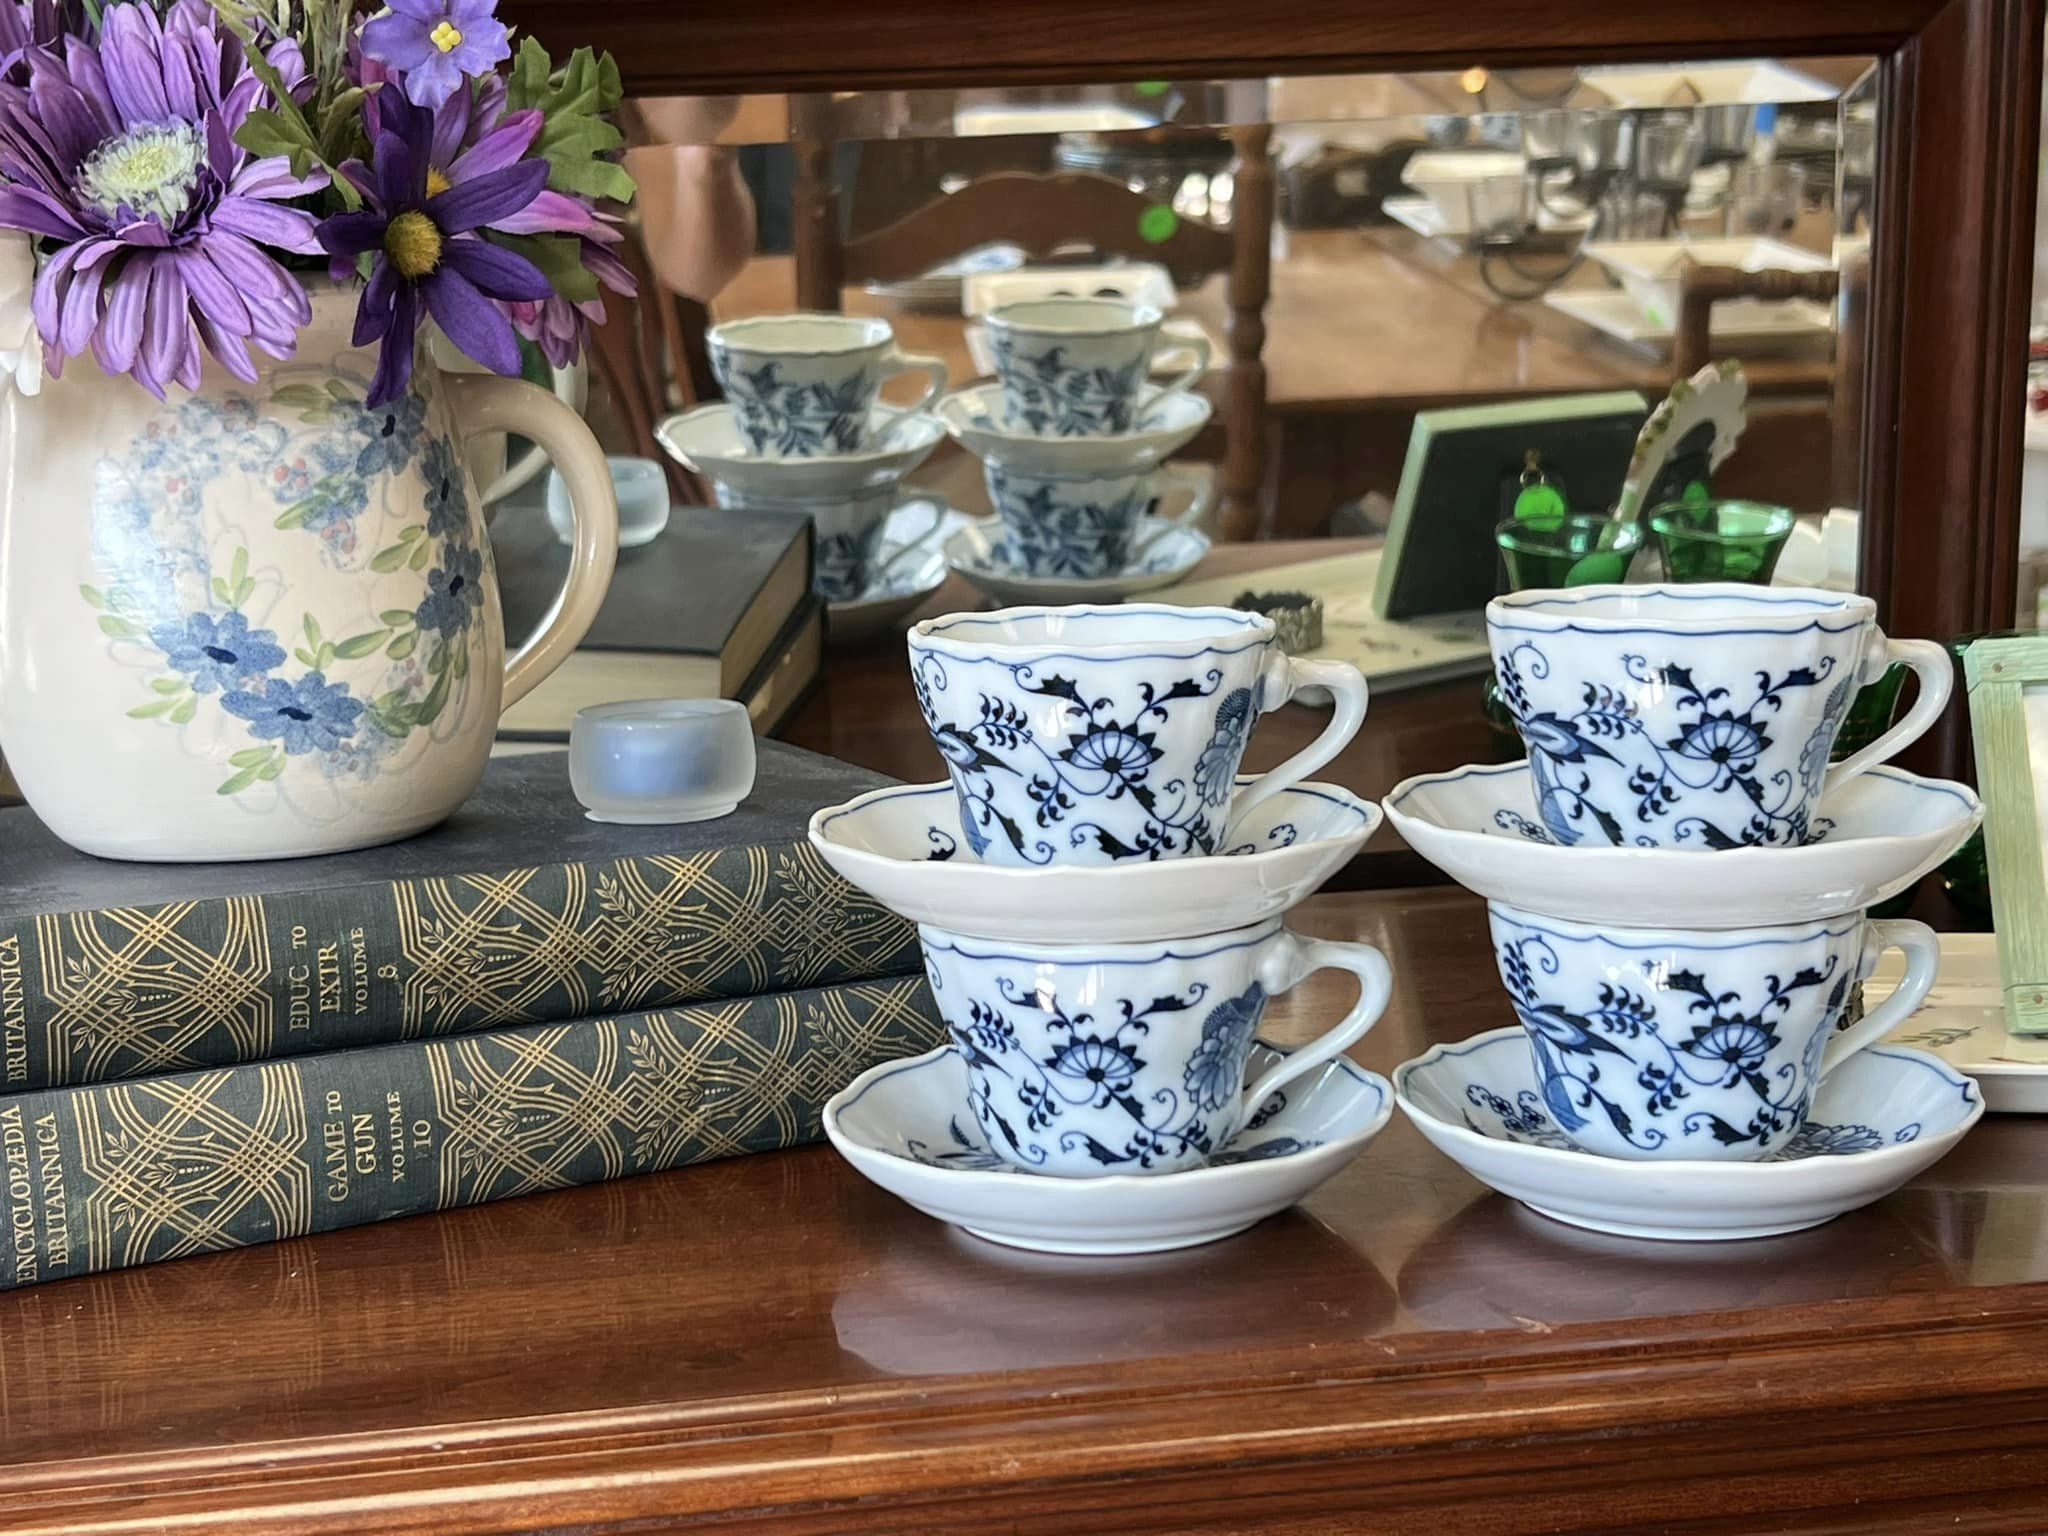 cups on a table